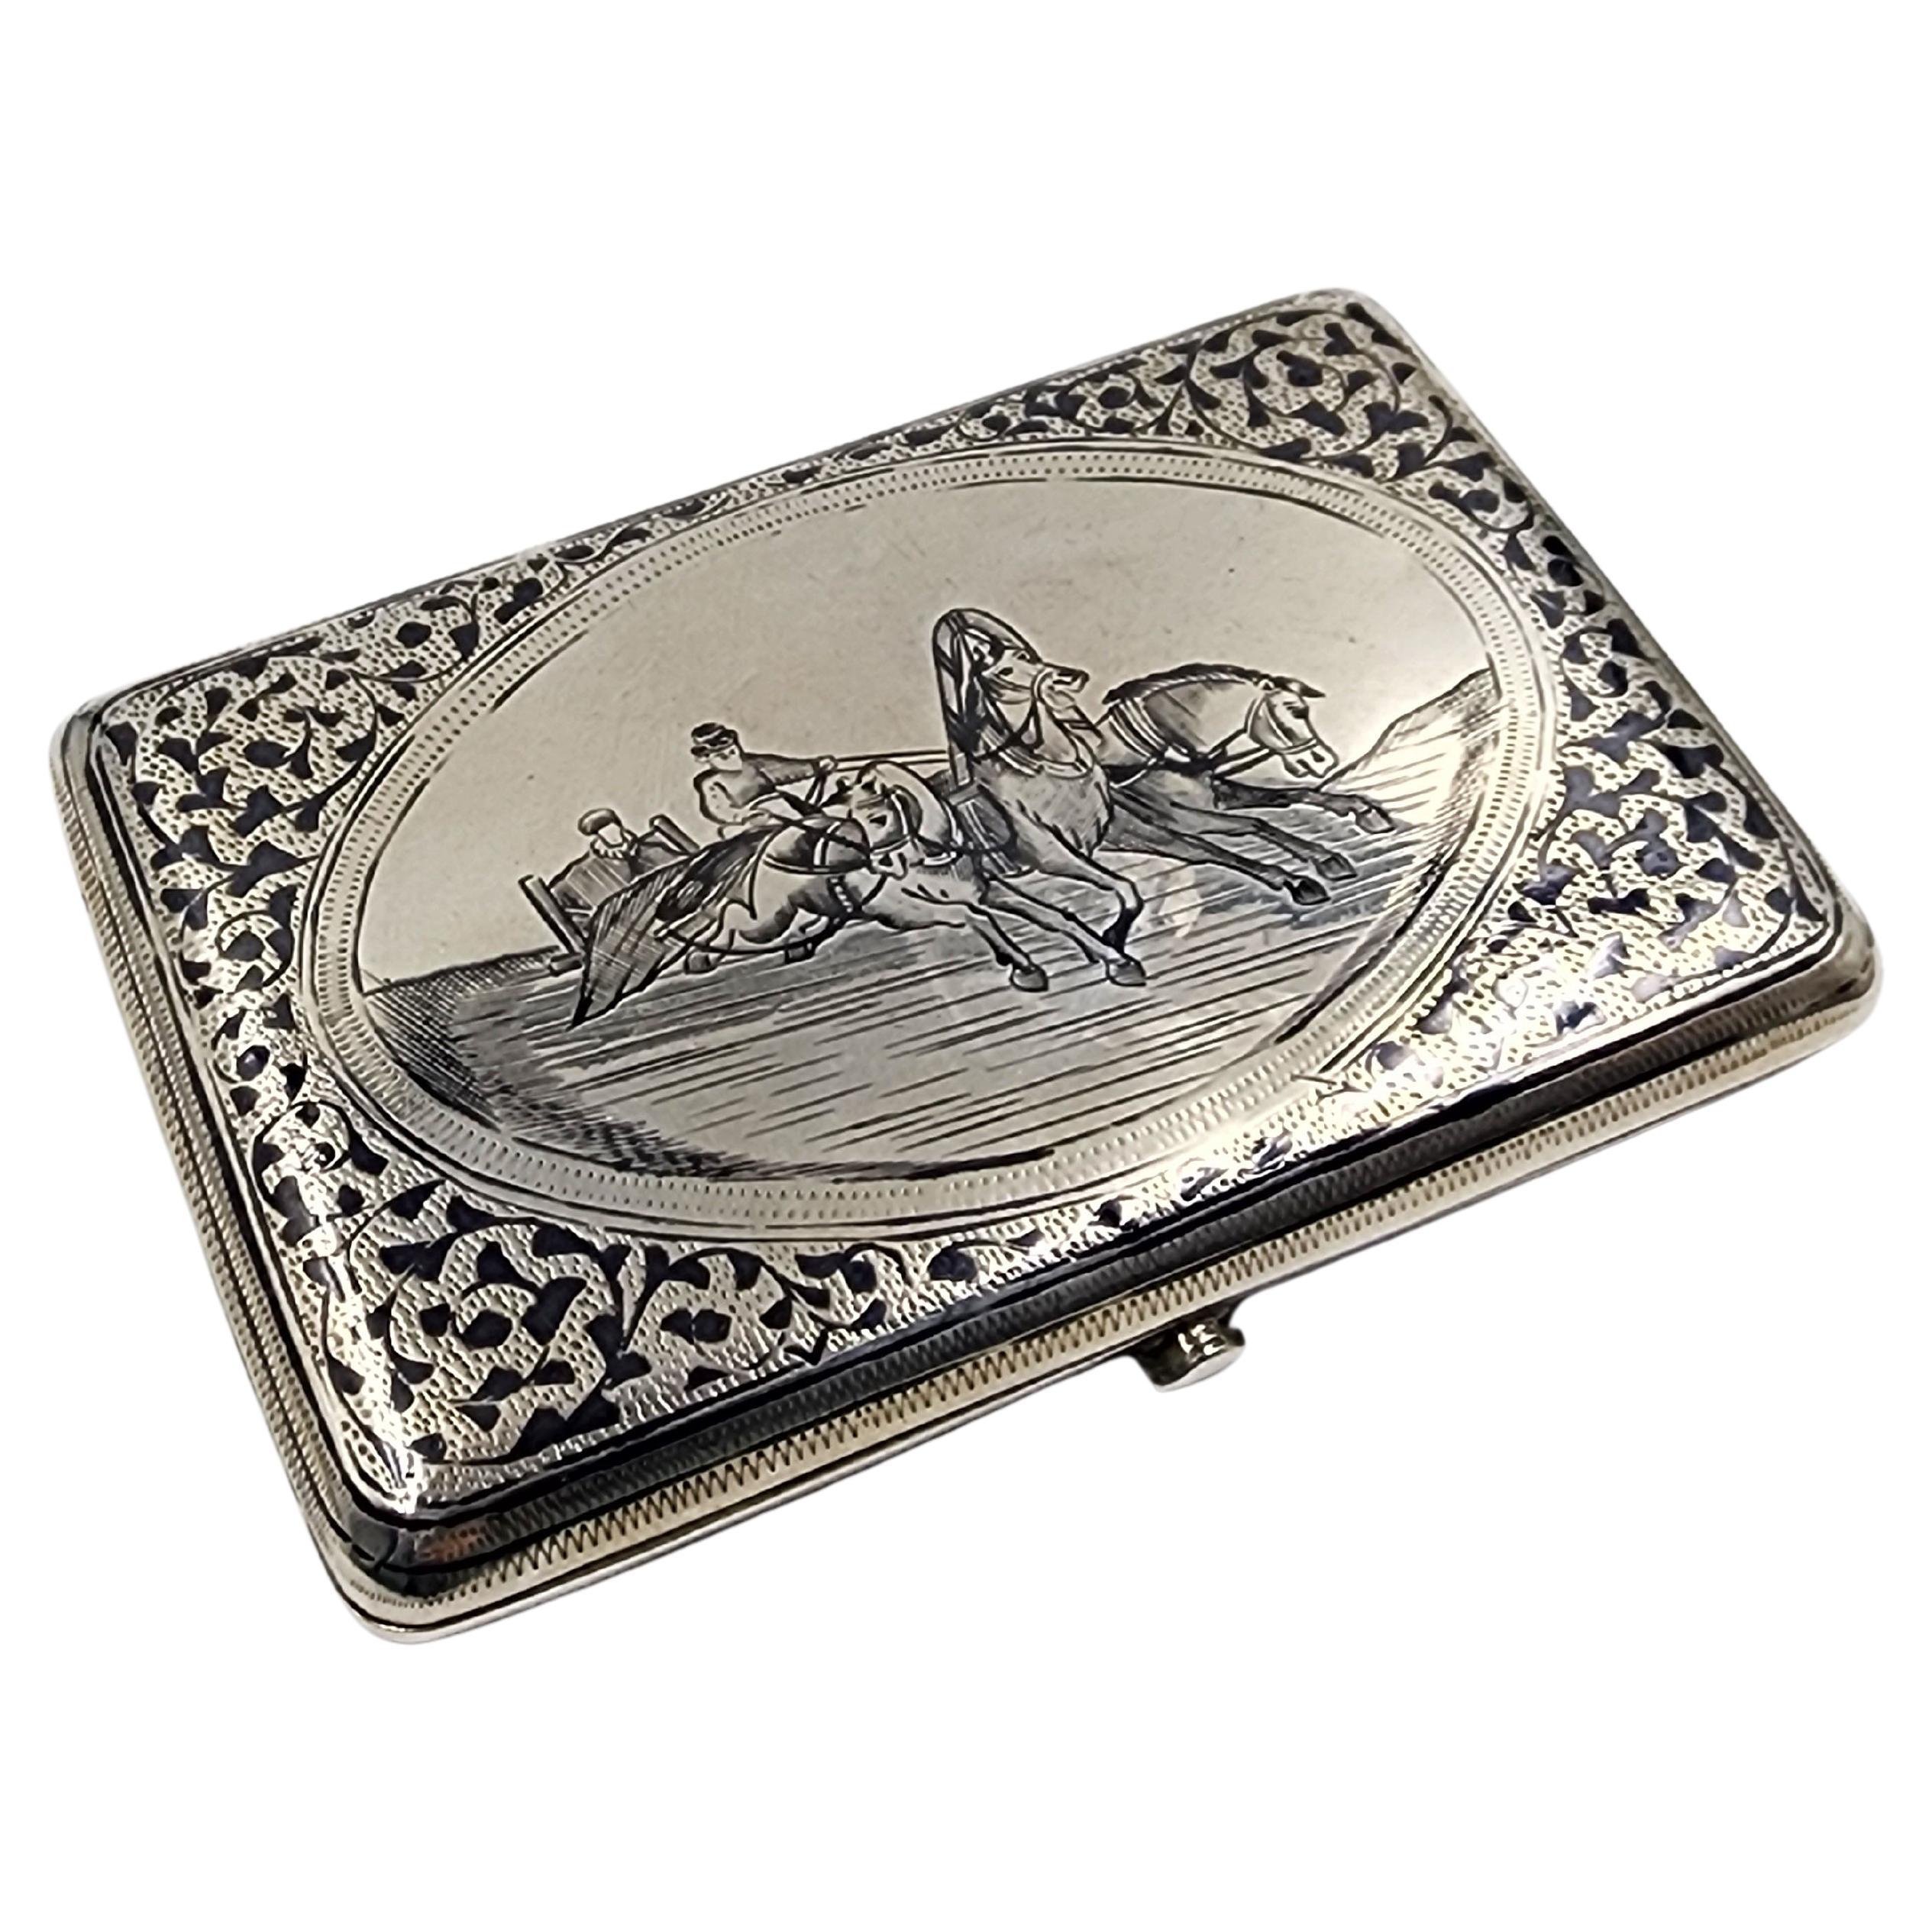 19th Century Russian silver and nickel plated tobacco box "sultan on horseback" For Sale